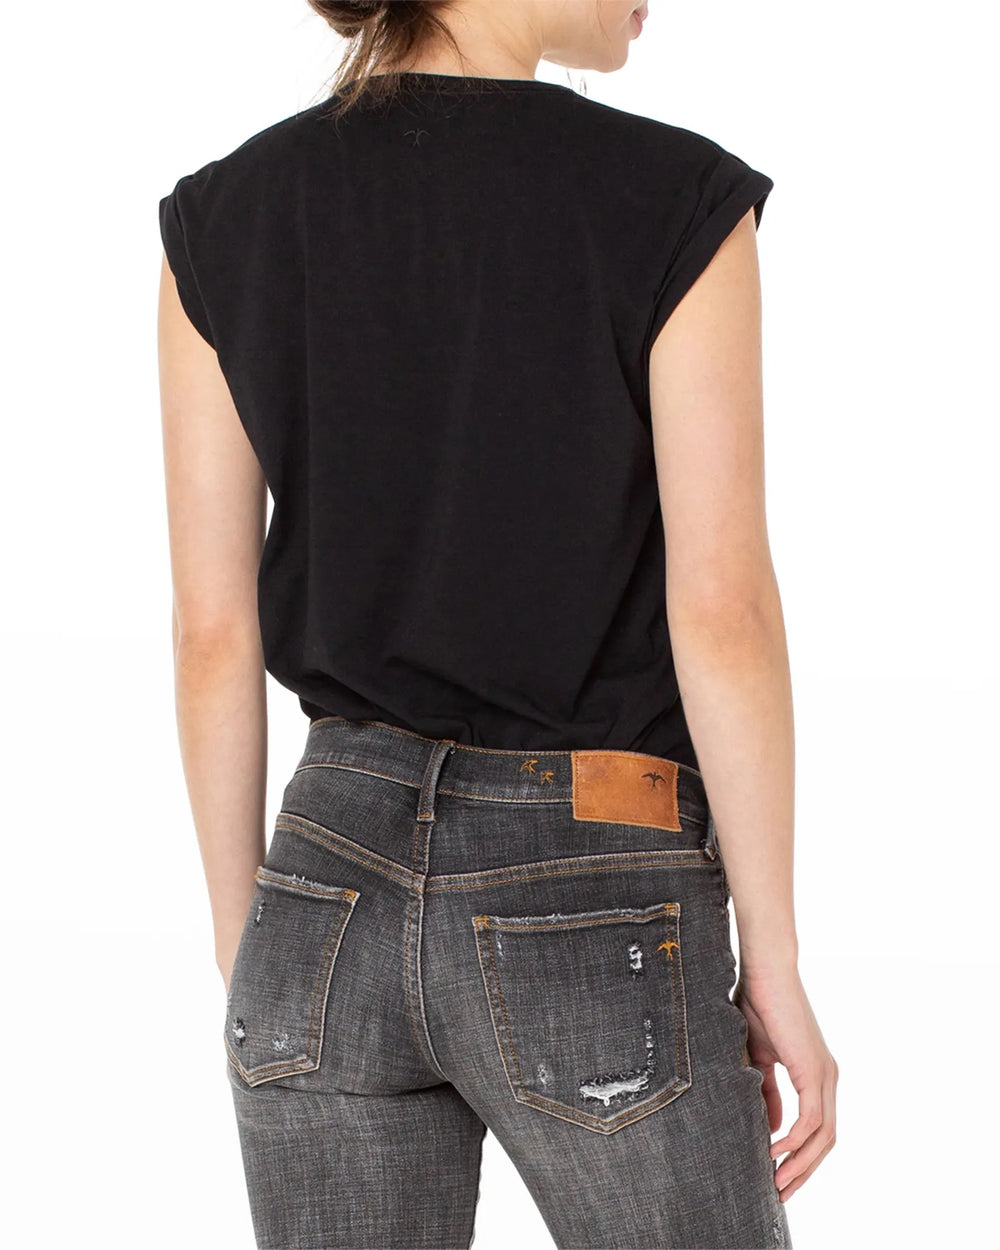 THE ROLLER S/S BASIC TOP - BLACK - Kingfisher Road - Online Boutique